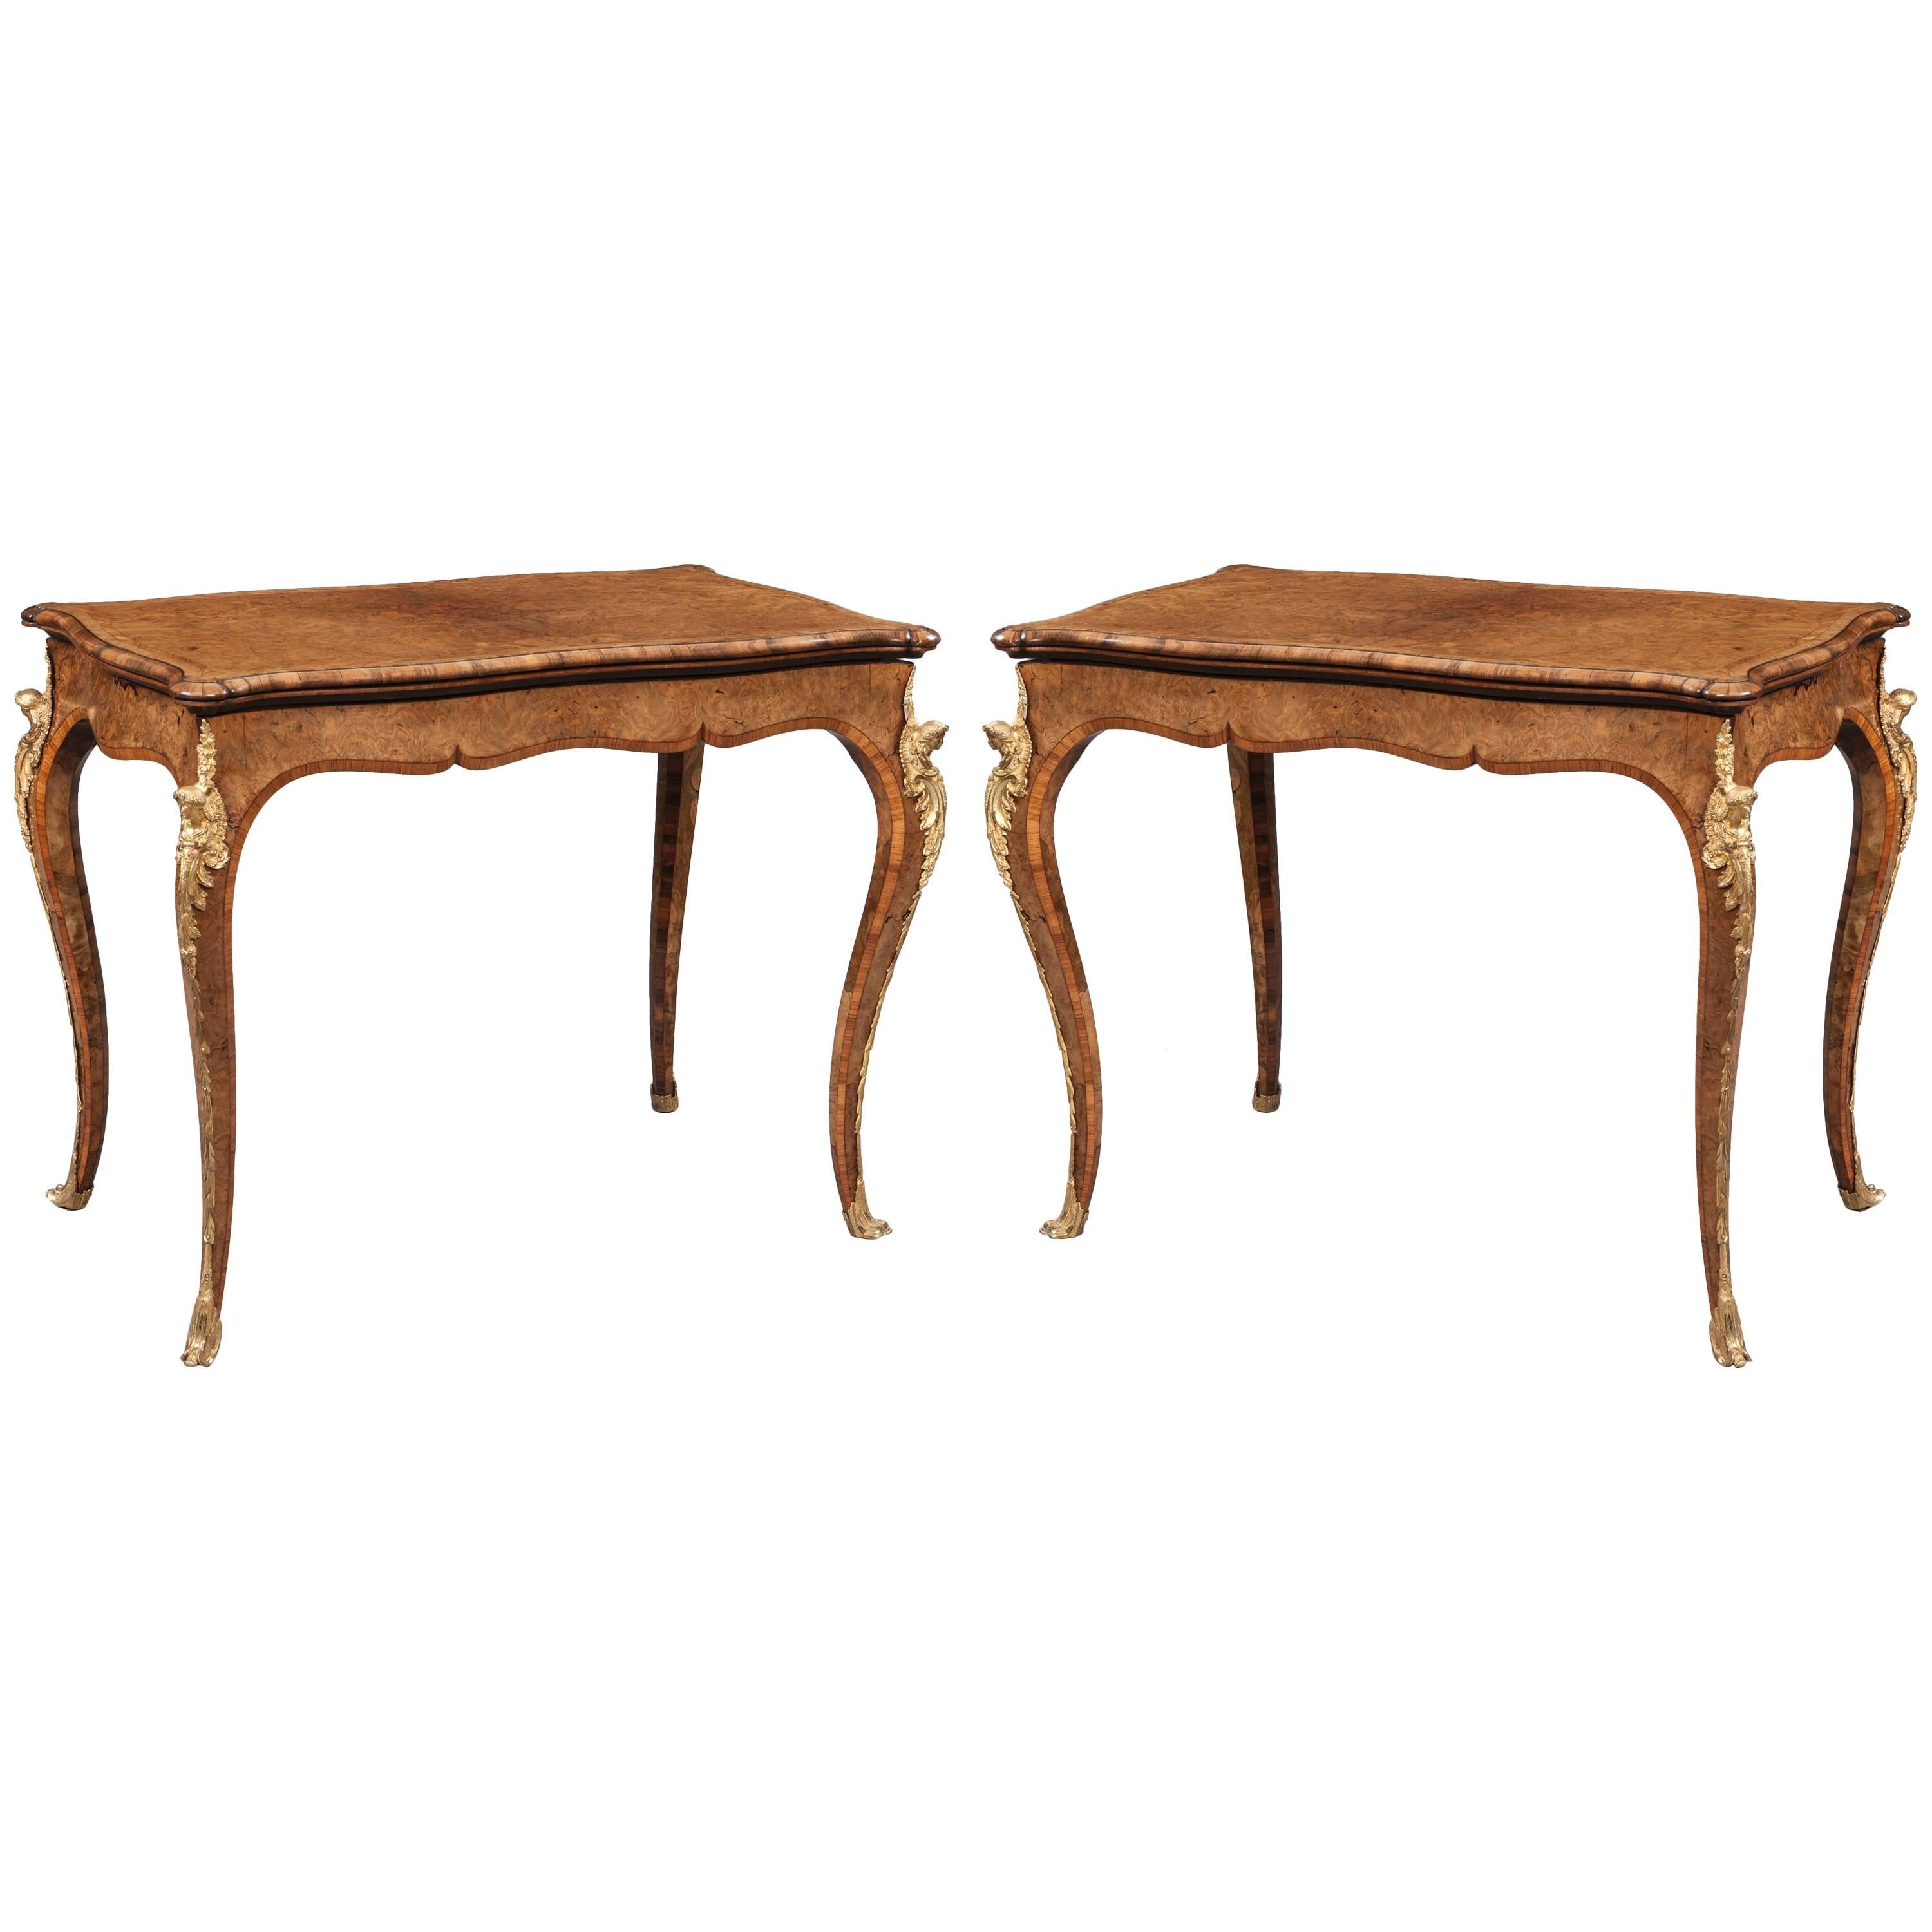 Pair of English Burr Walnut Card Tables Attributed to Gillows of Lancaster